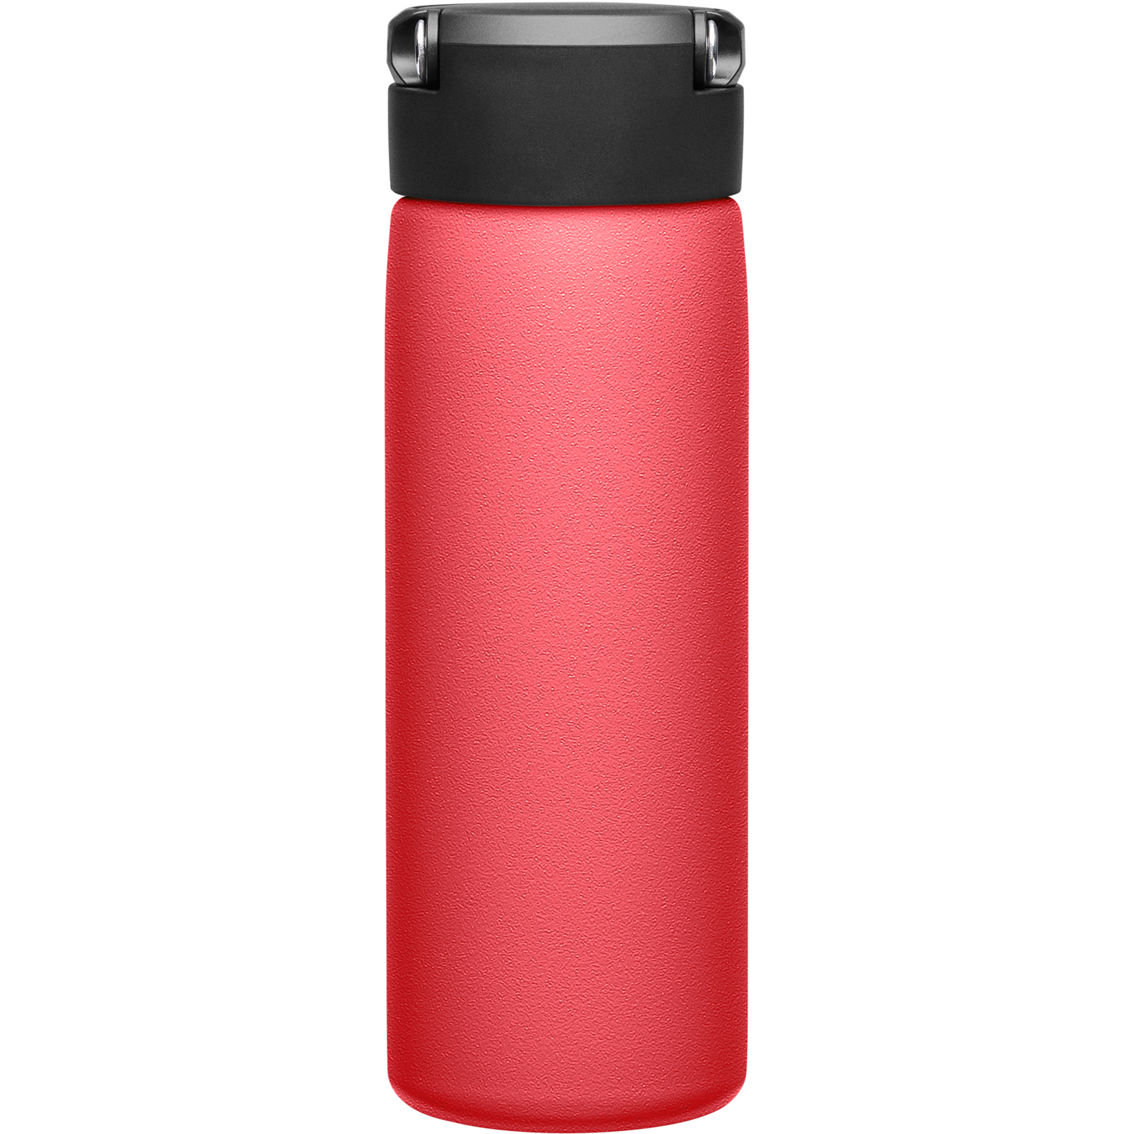 Camelbak Fit Cap Insulated Stainless Steel 20 oz. Water Bottle - Image 6 of 8